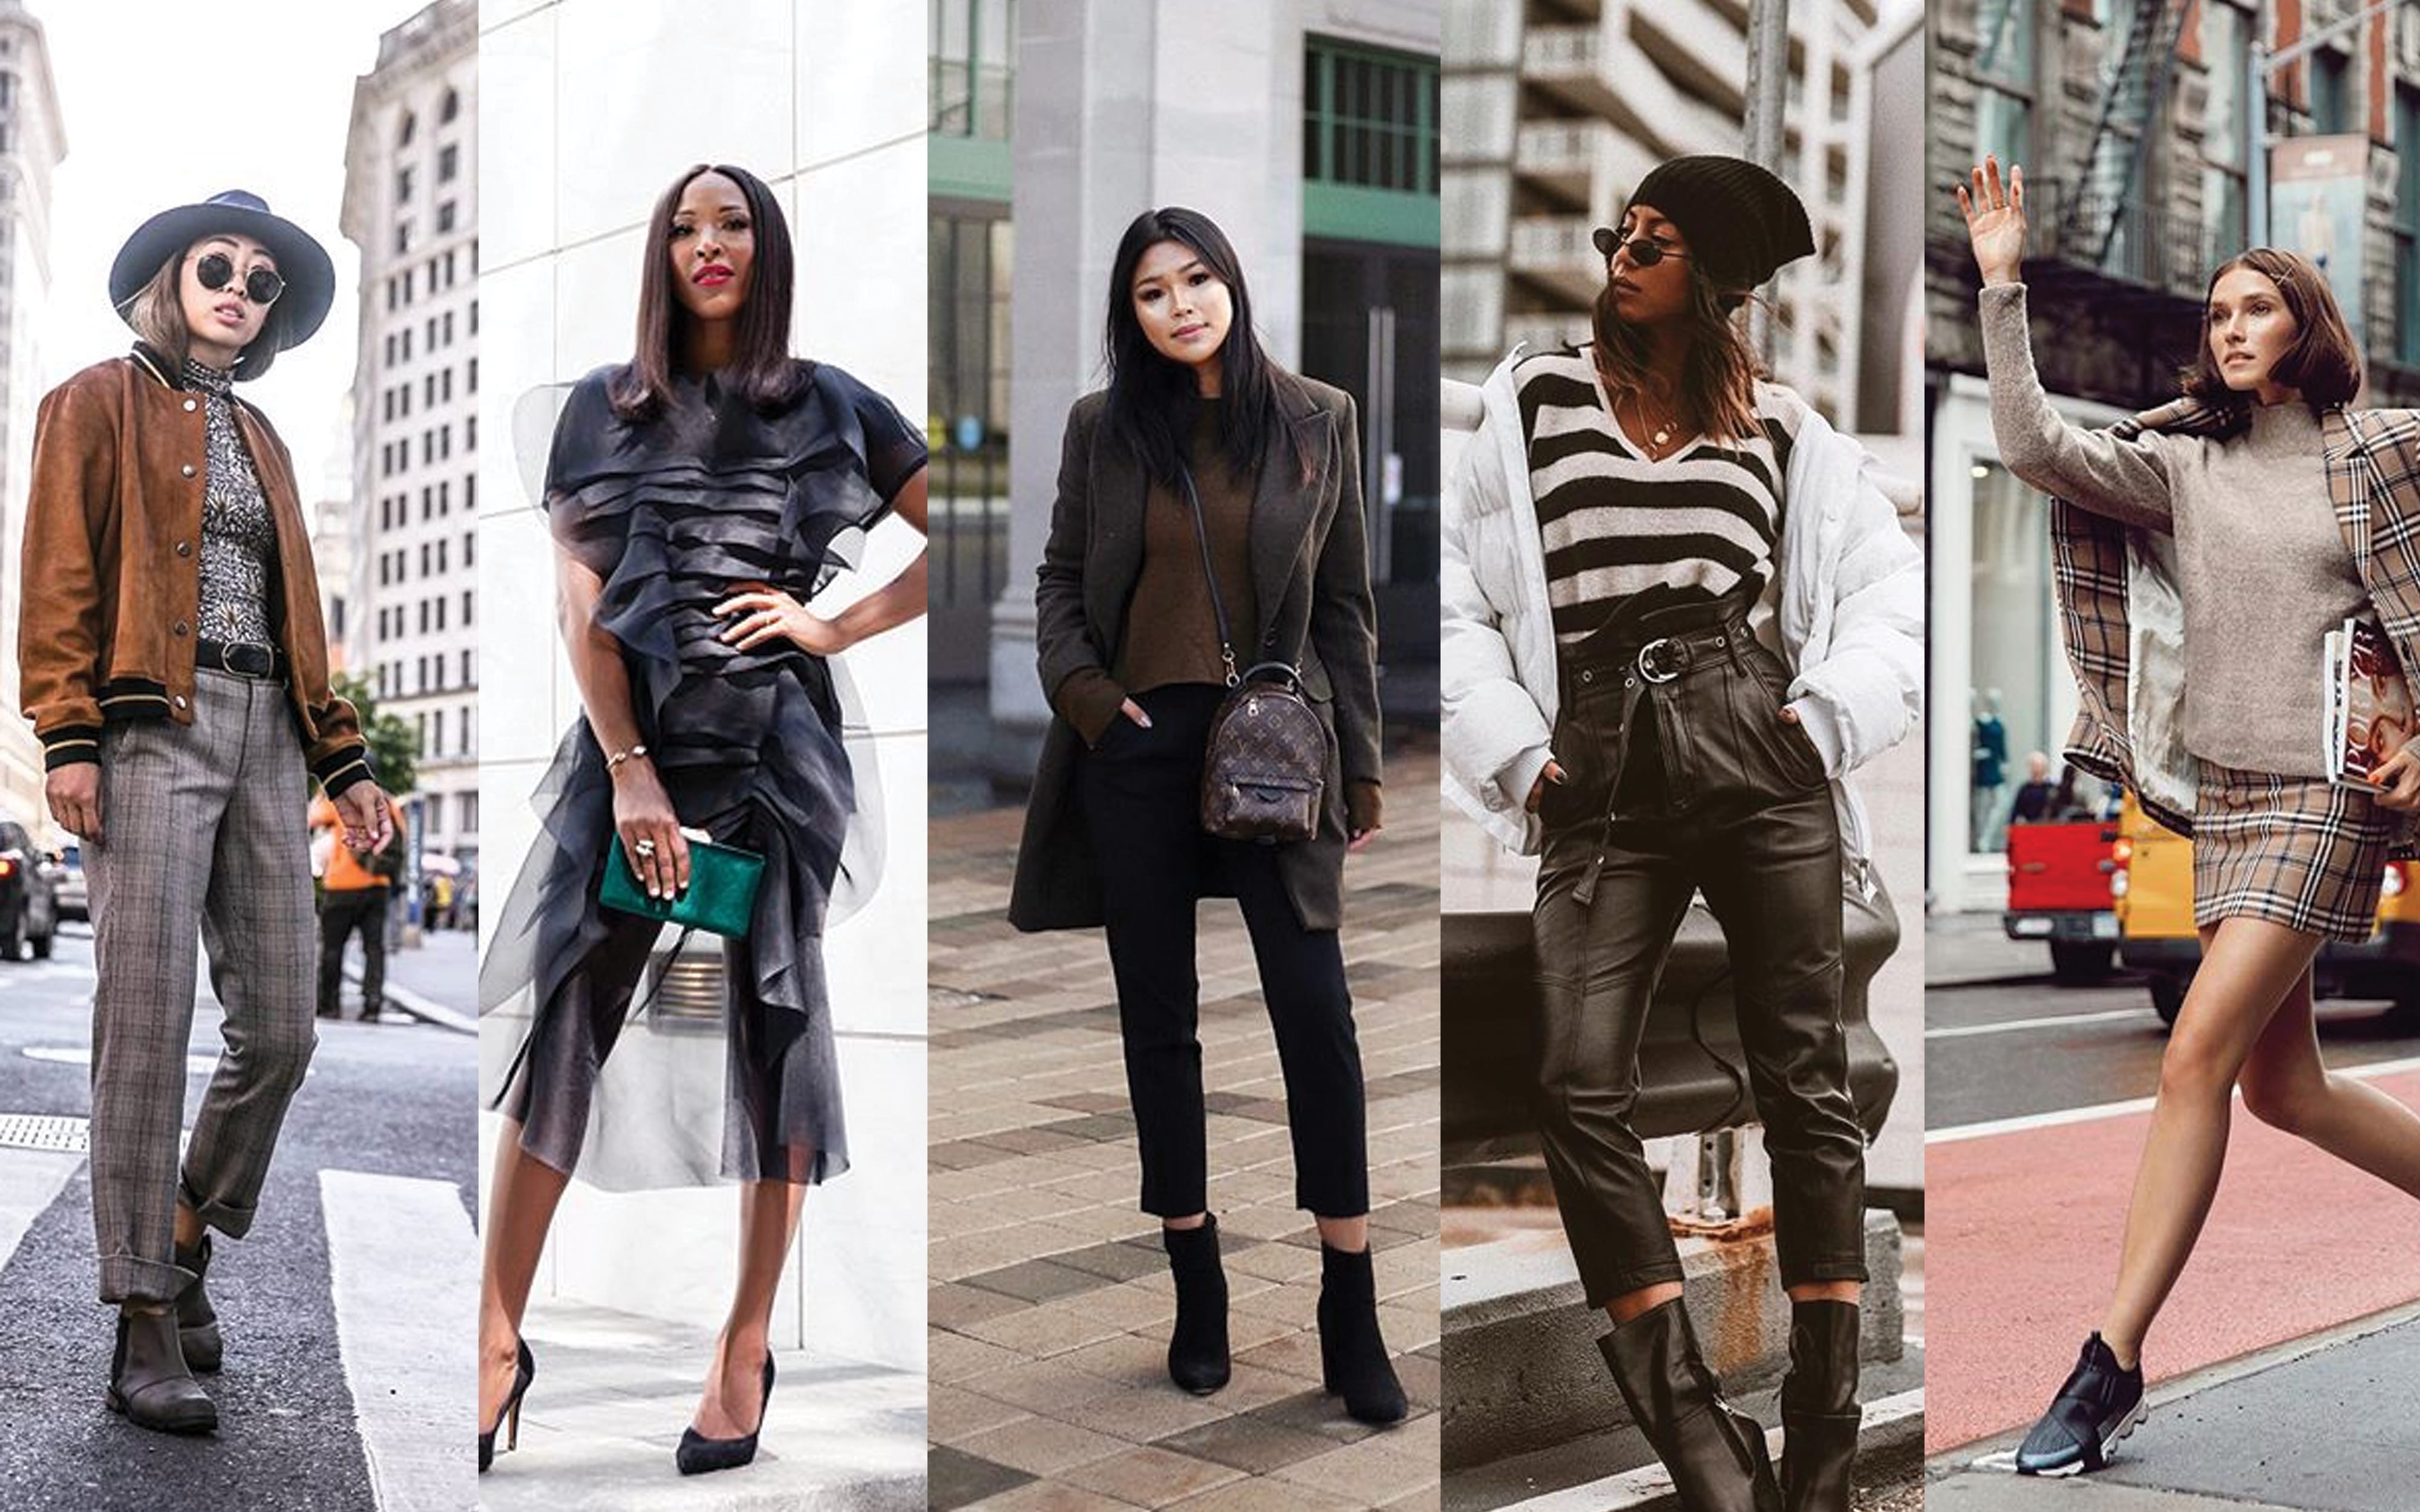 What's the Difference Between a Fashion Blogger and an Influencer?